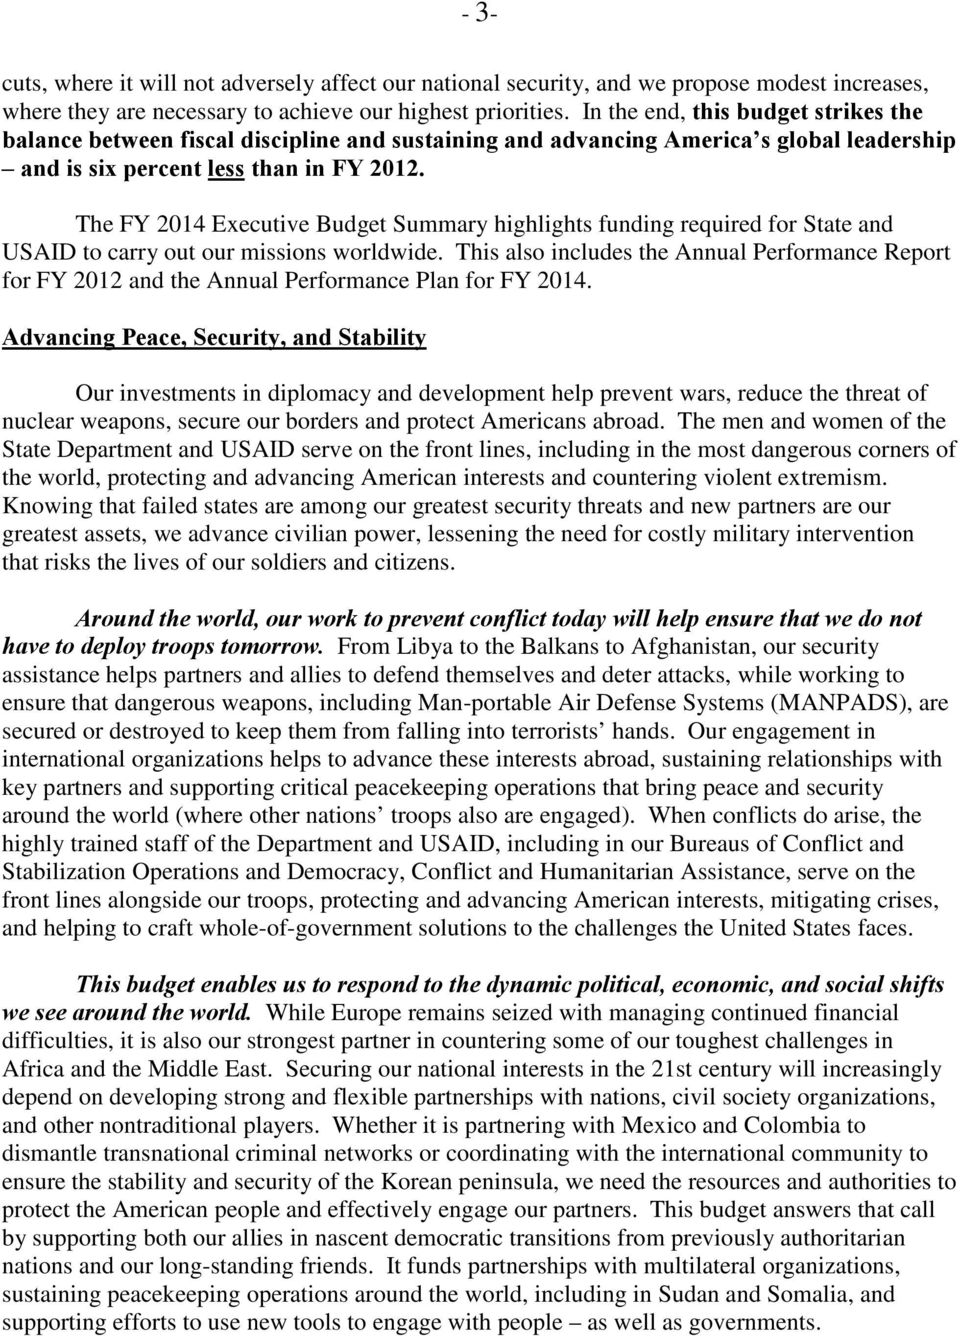 The FY 2014 Executive Budget Summary highlights funding required for State and USAID to carry out our missions worldwide.